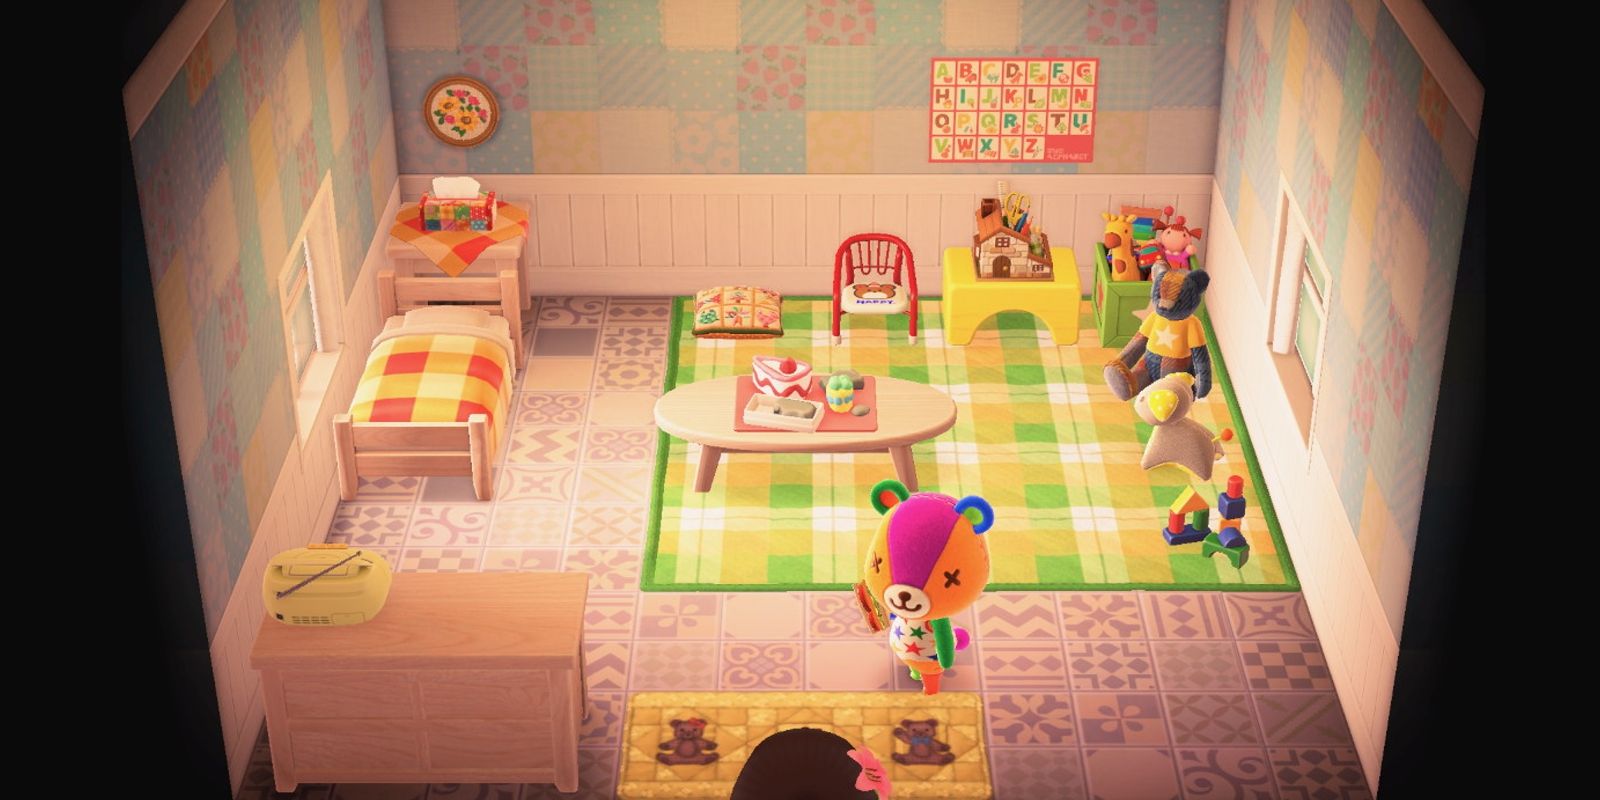 Stitches in his house in Animal Crossing New Horizons